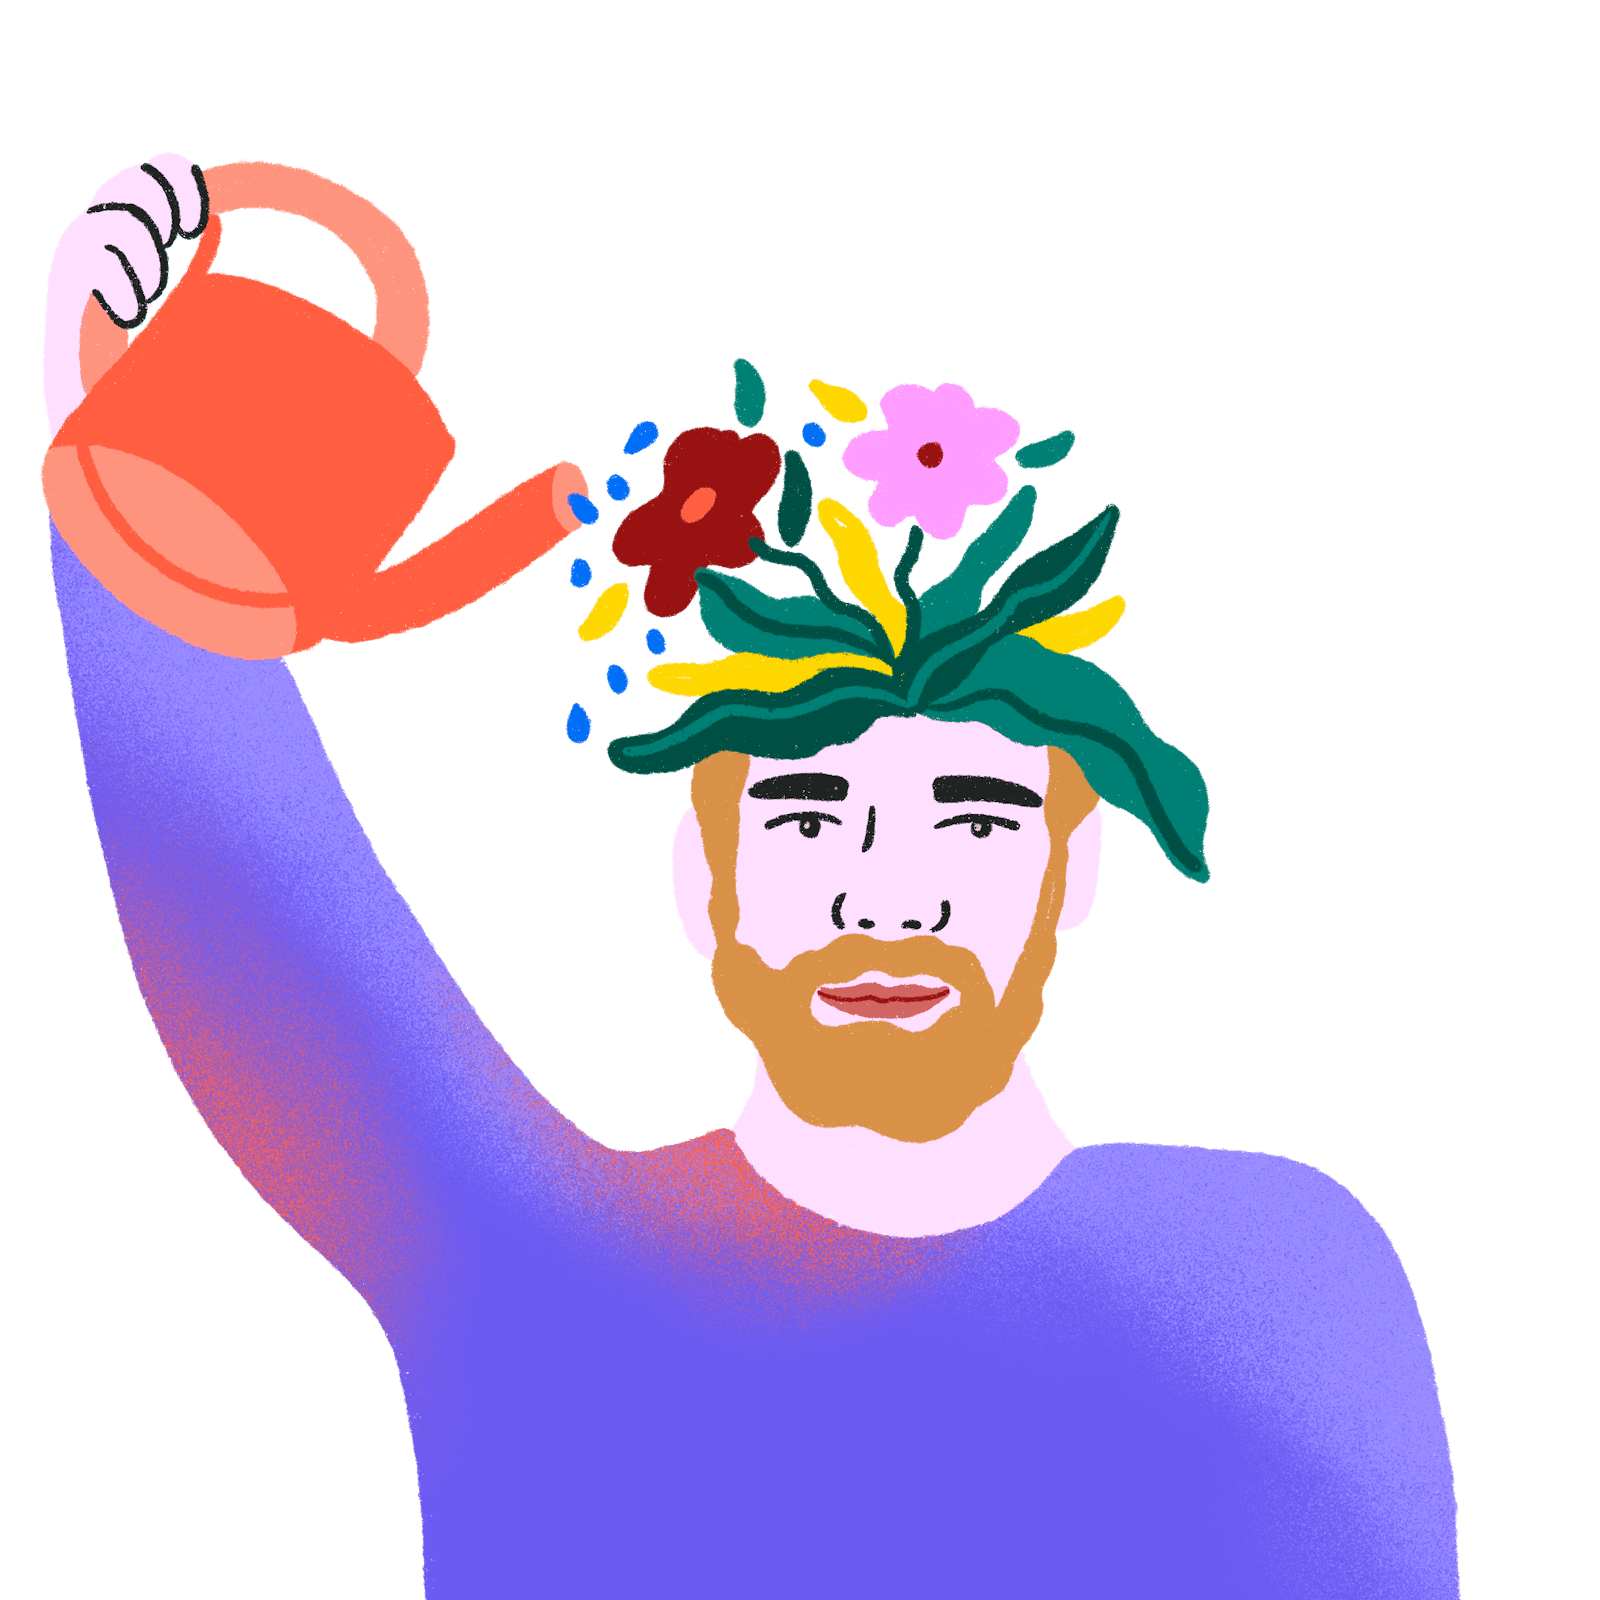 Illustration of a person pouring water on the plants on their own head to make them grow